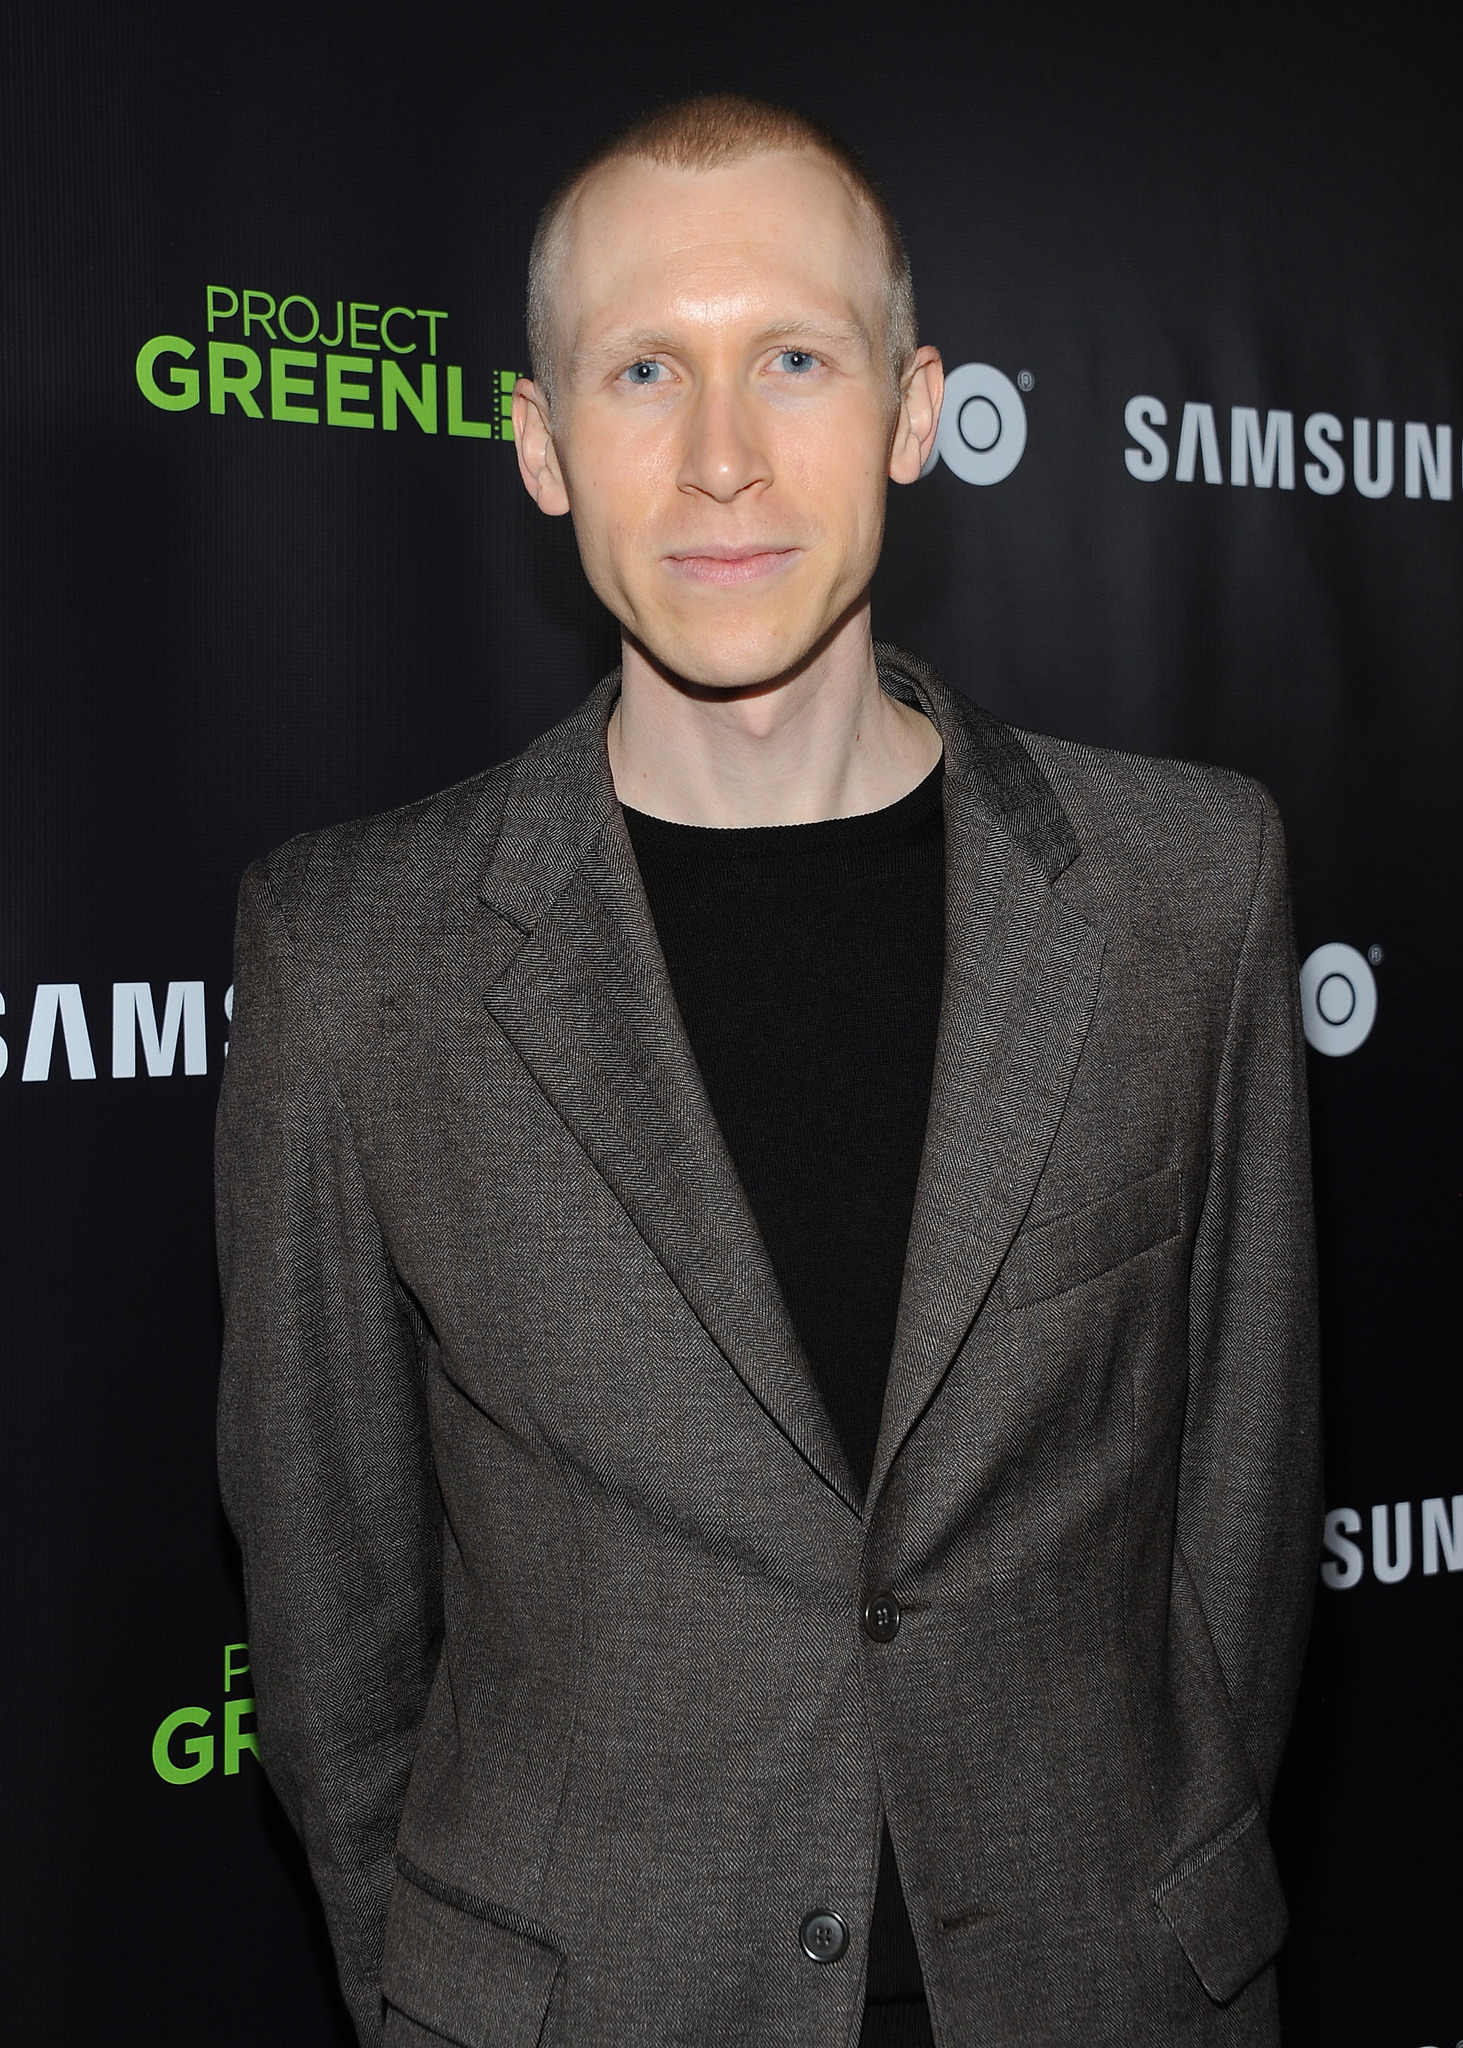 Jason Mann at event of Project Greenlight (2001)